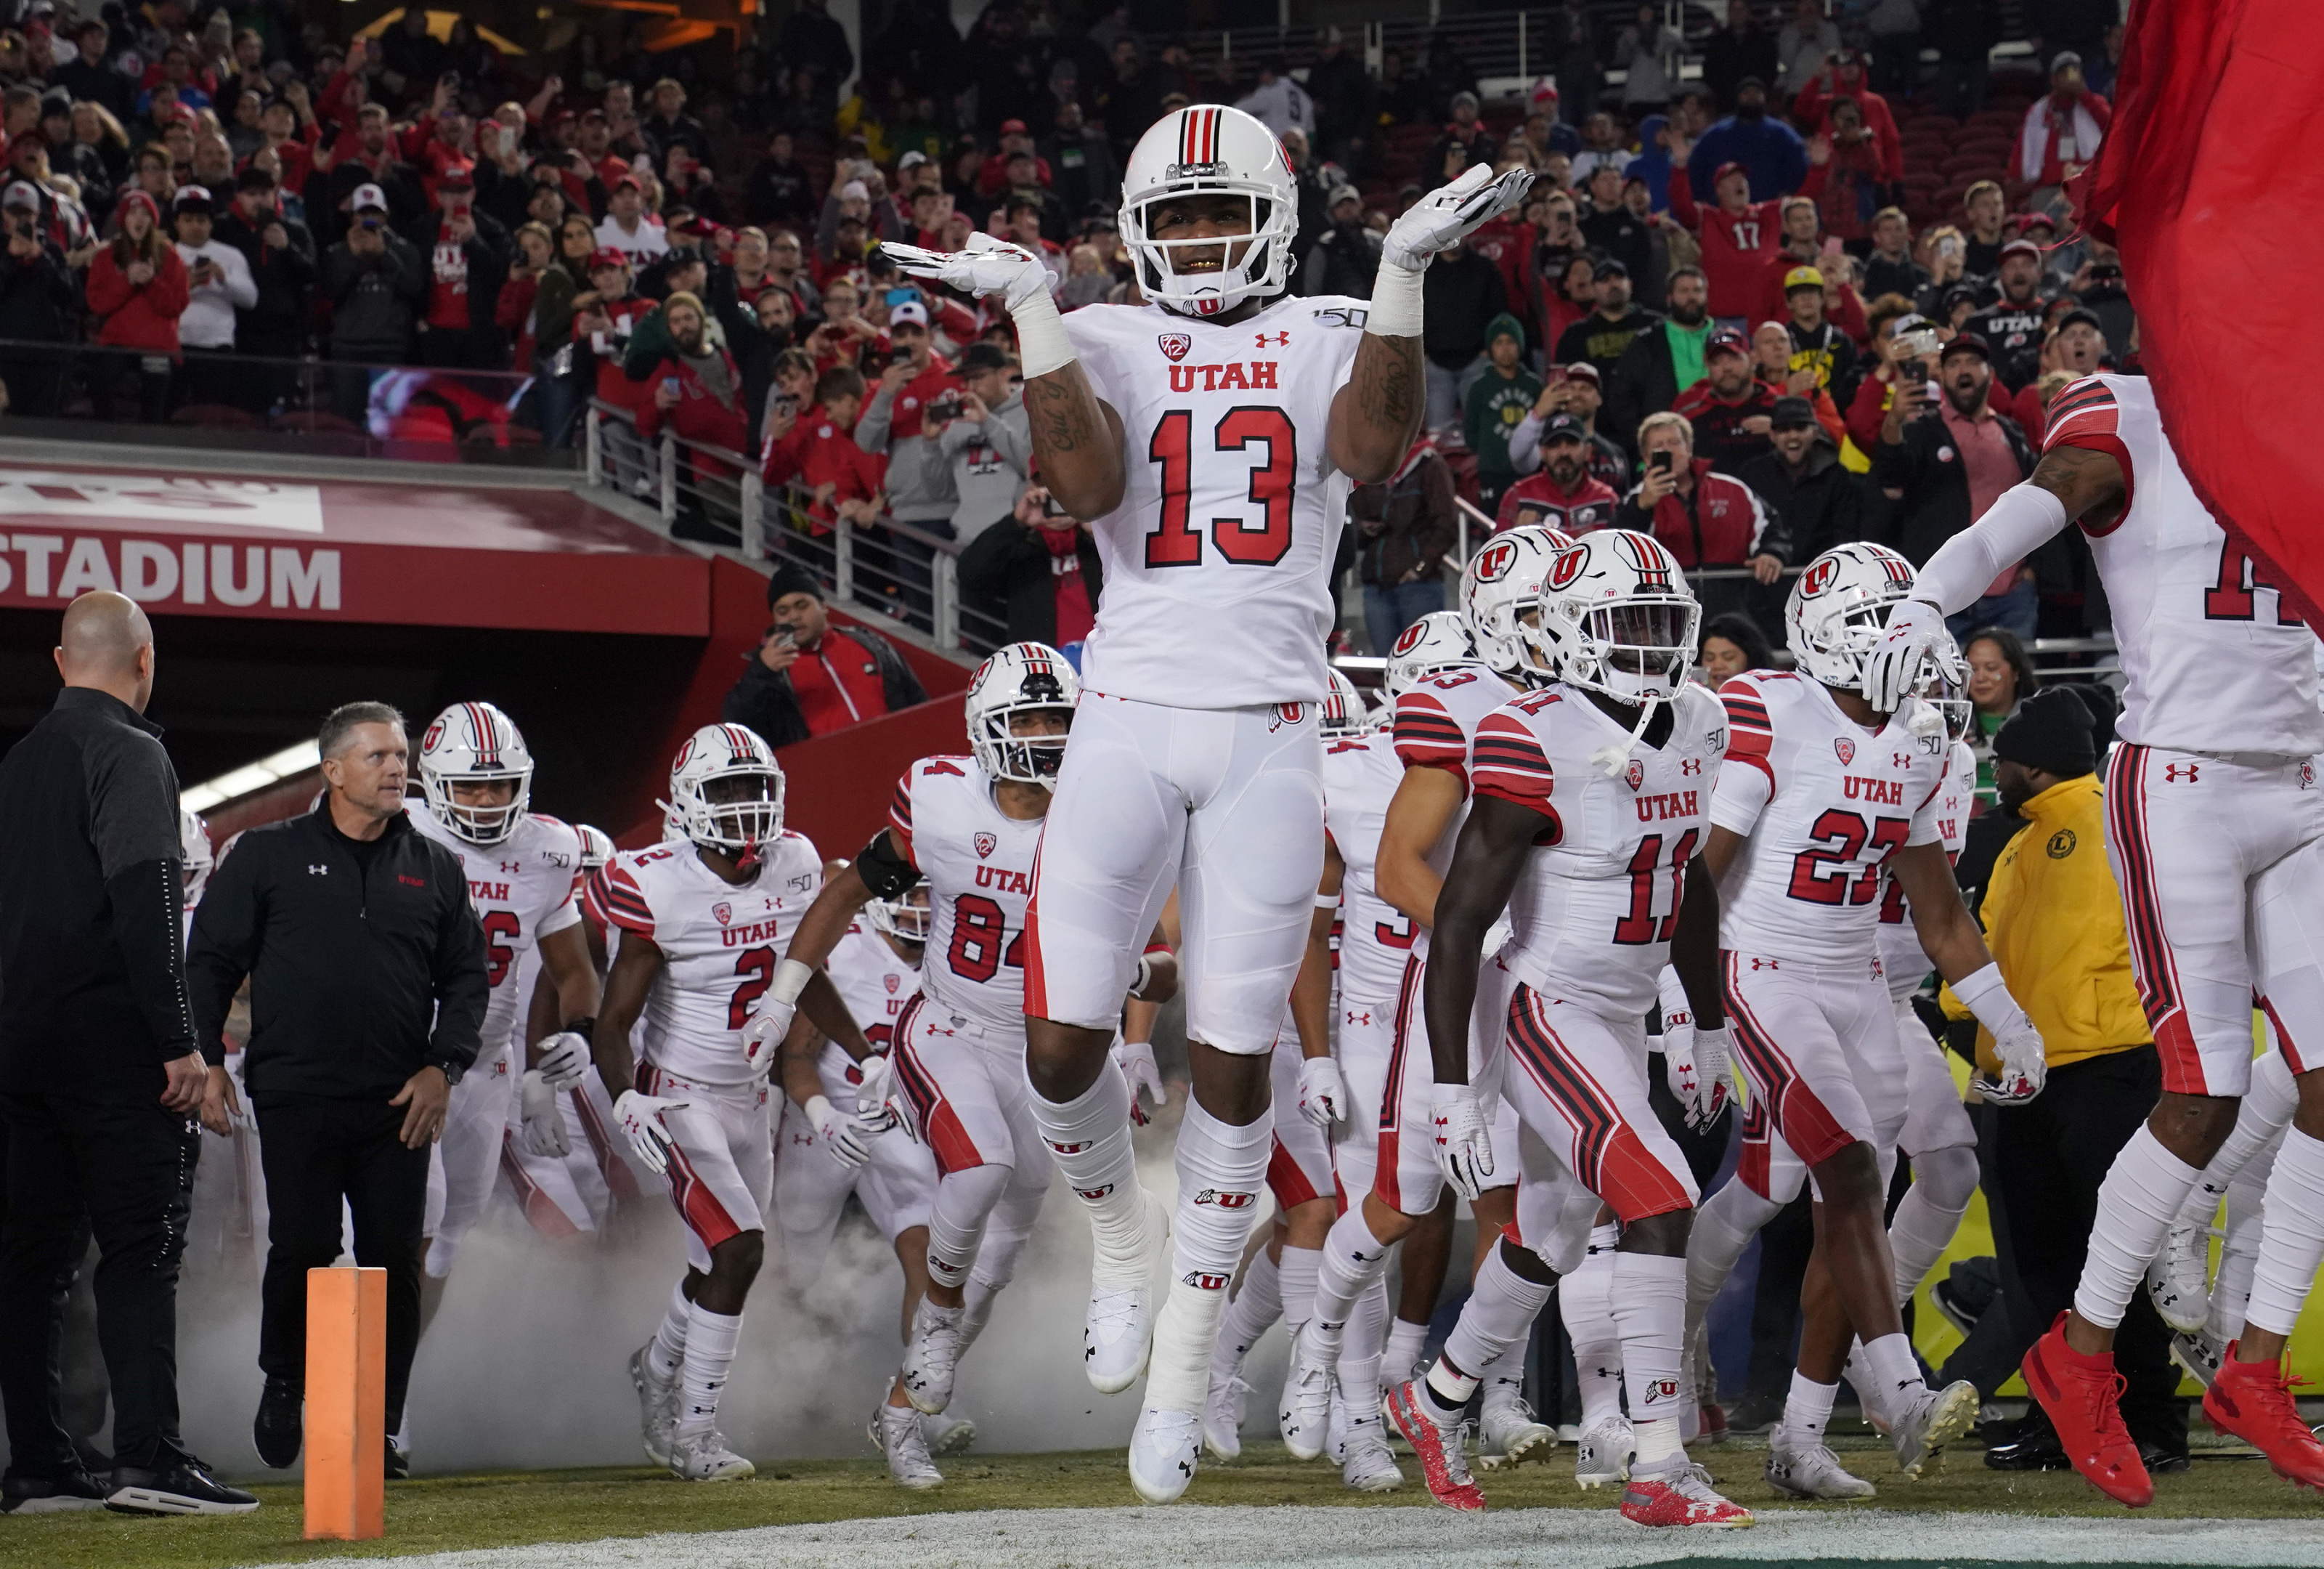 Utah football: Zack Moss helps drive rising expectations for Utes